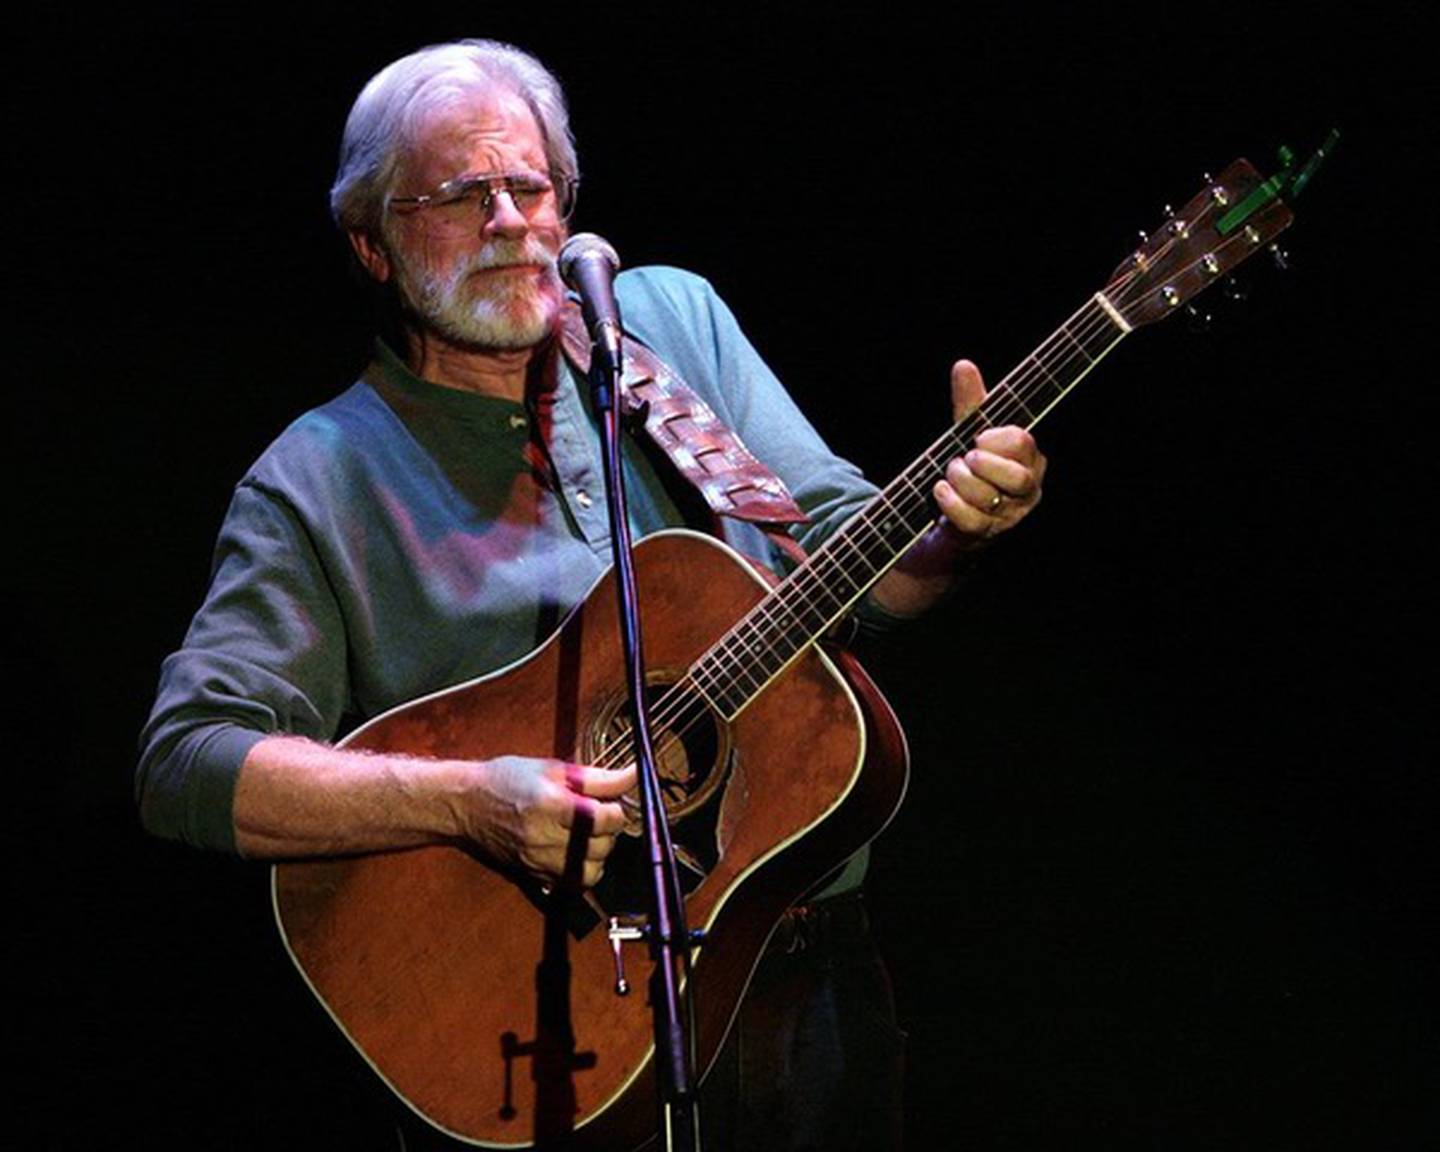 Performing in the Fox Valley Folk Music & Storytelling Festival will be Jack Williams.